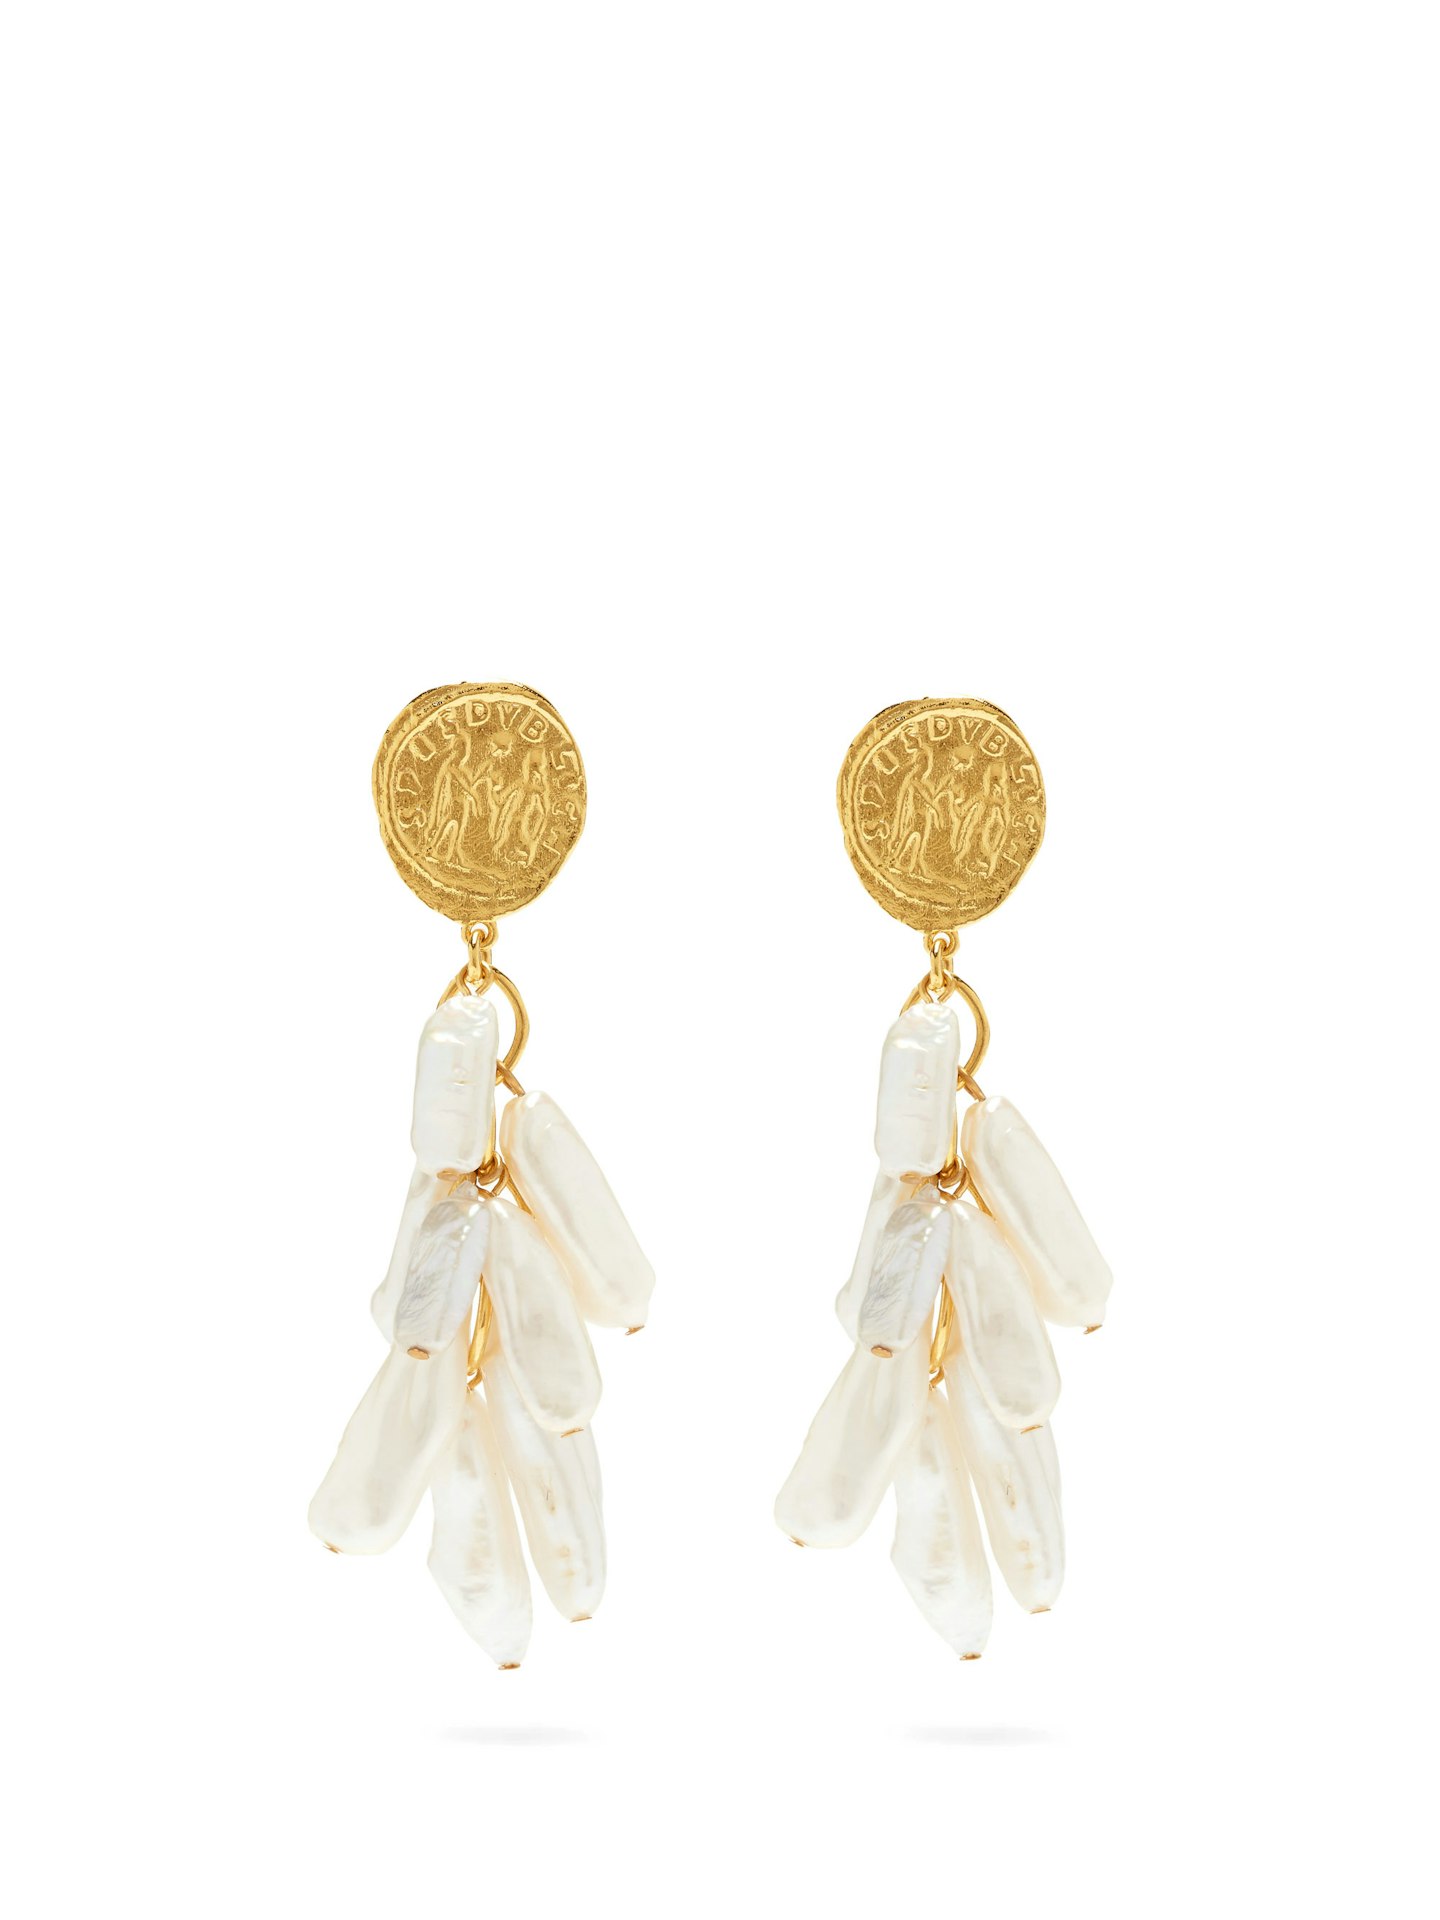 LIZZIE FORTUNATO, Roma freshwater-pearl gold-plated drop earrings, £275